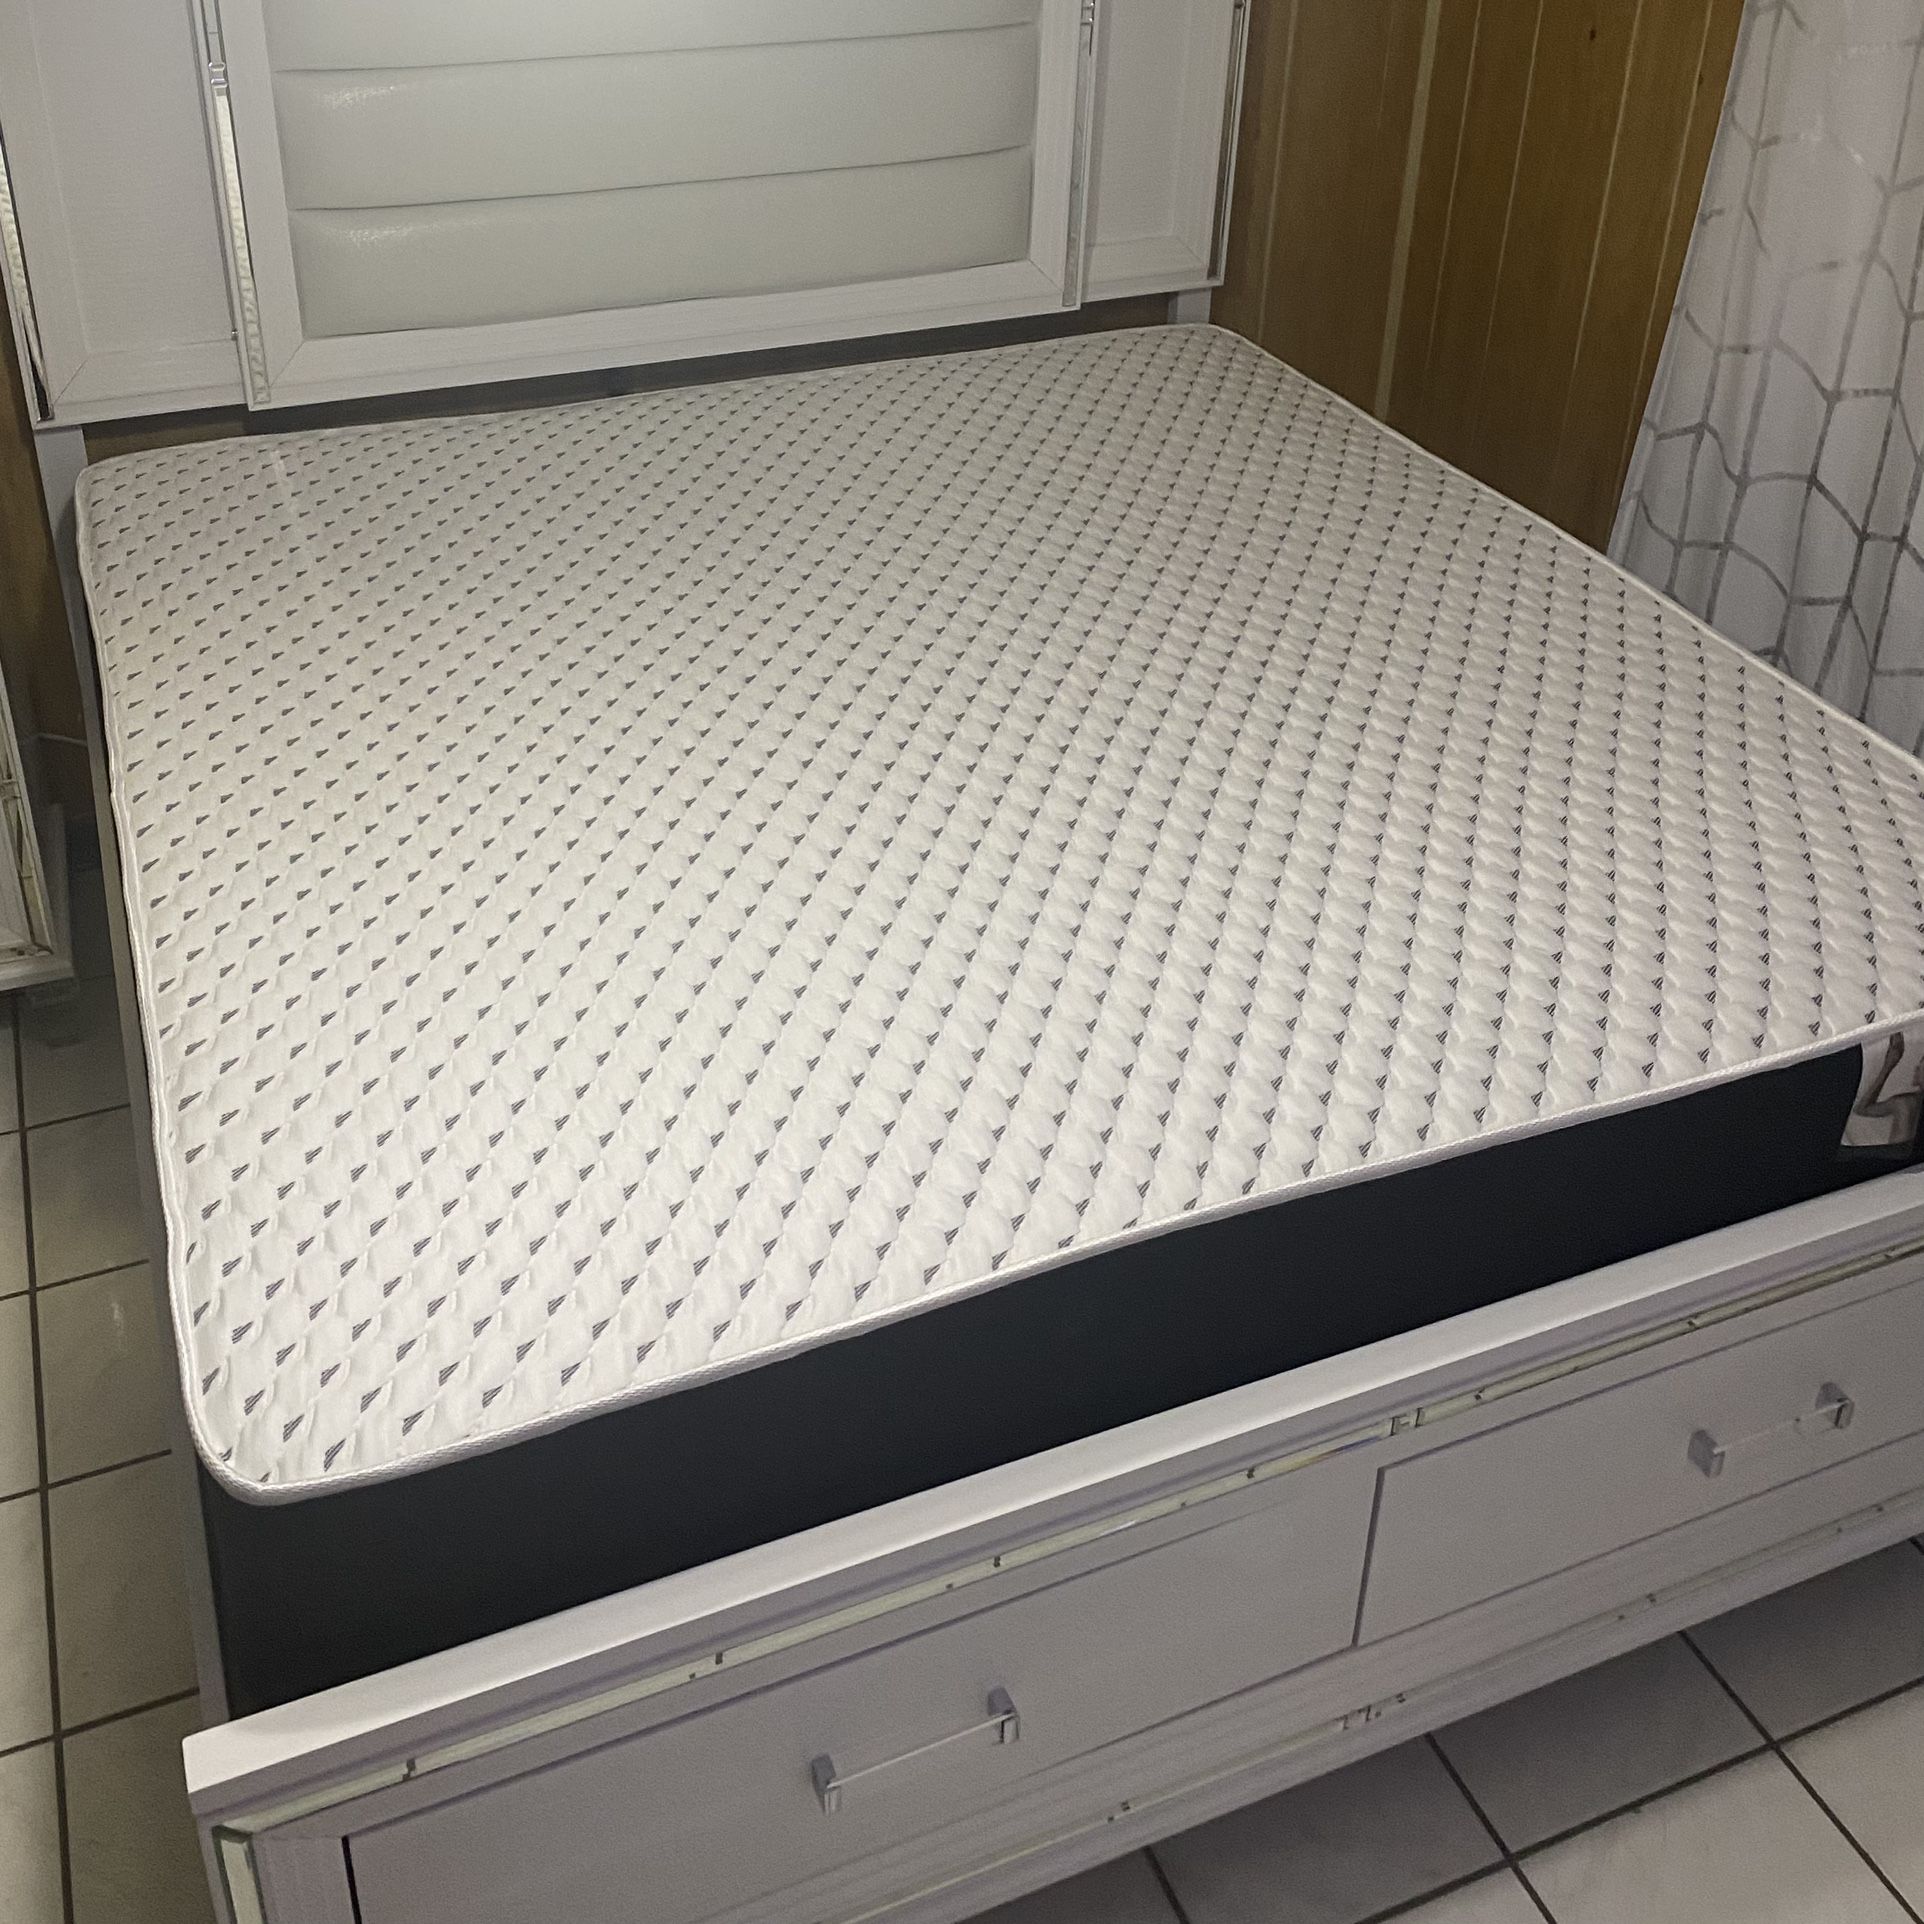 King Size Mattress 10 Inches Thick Also Available in Twin-Full-Queen New From Factory Same Day Delivery